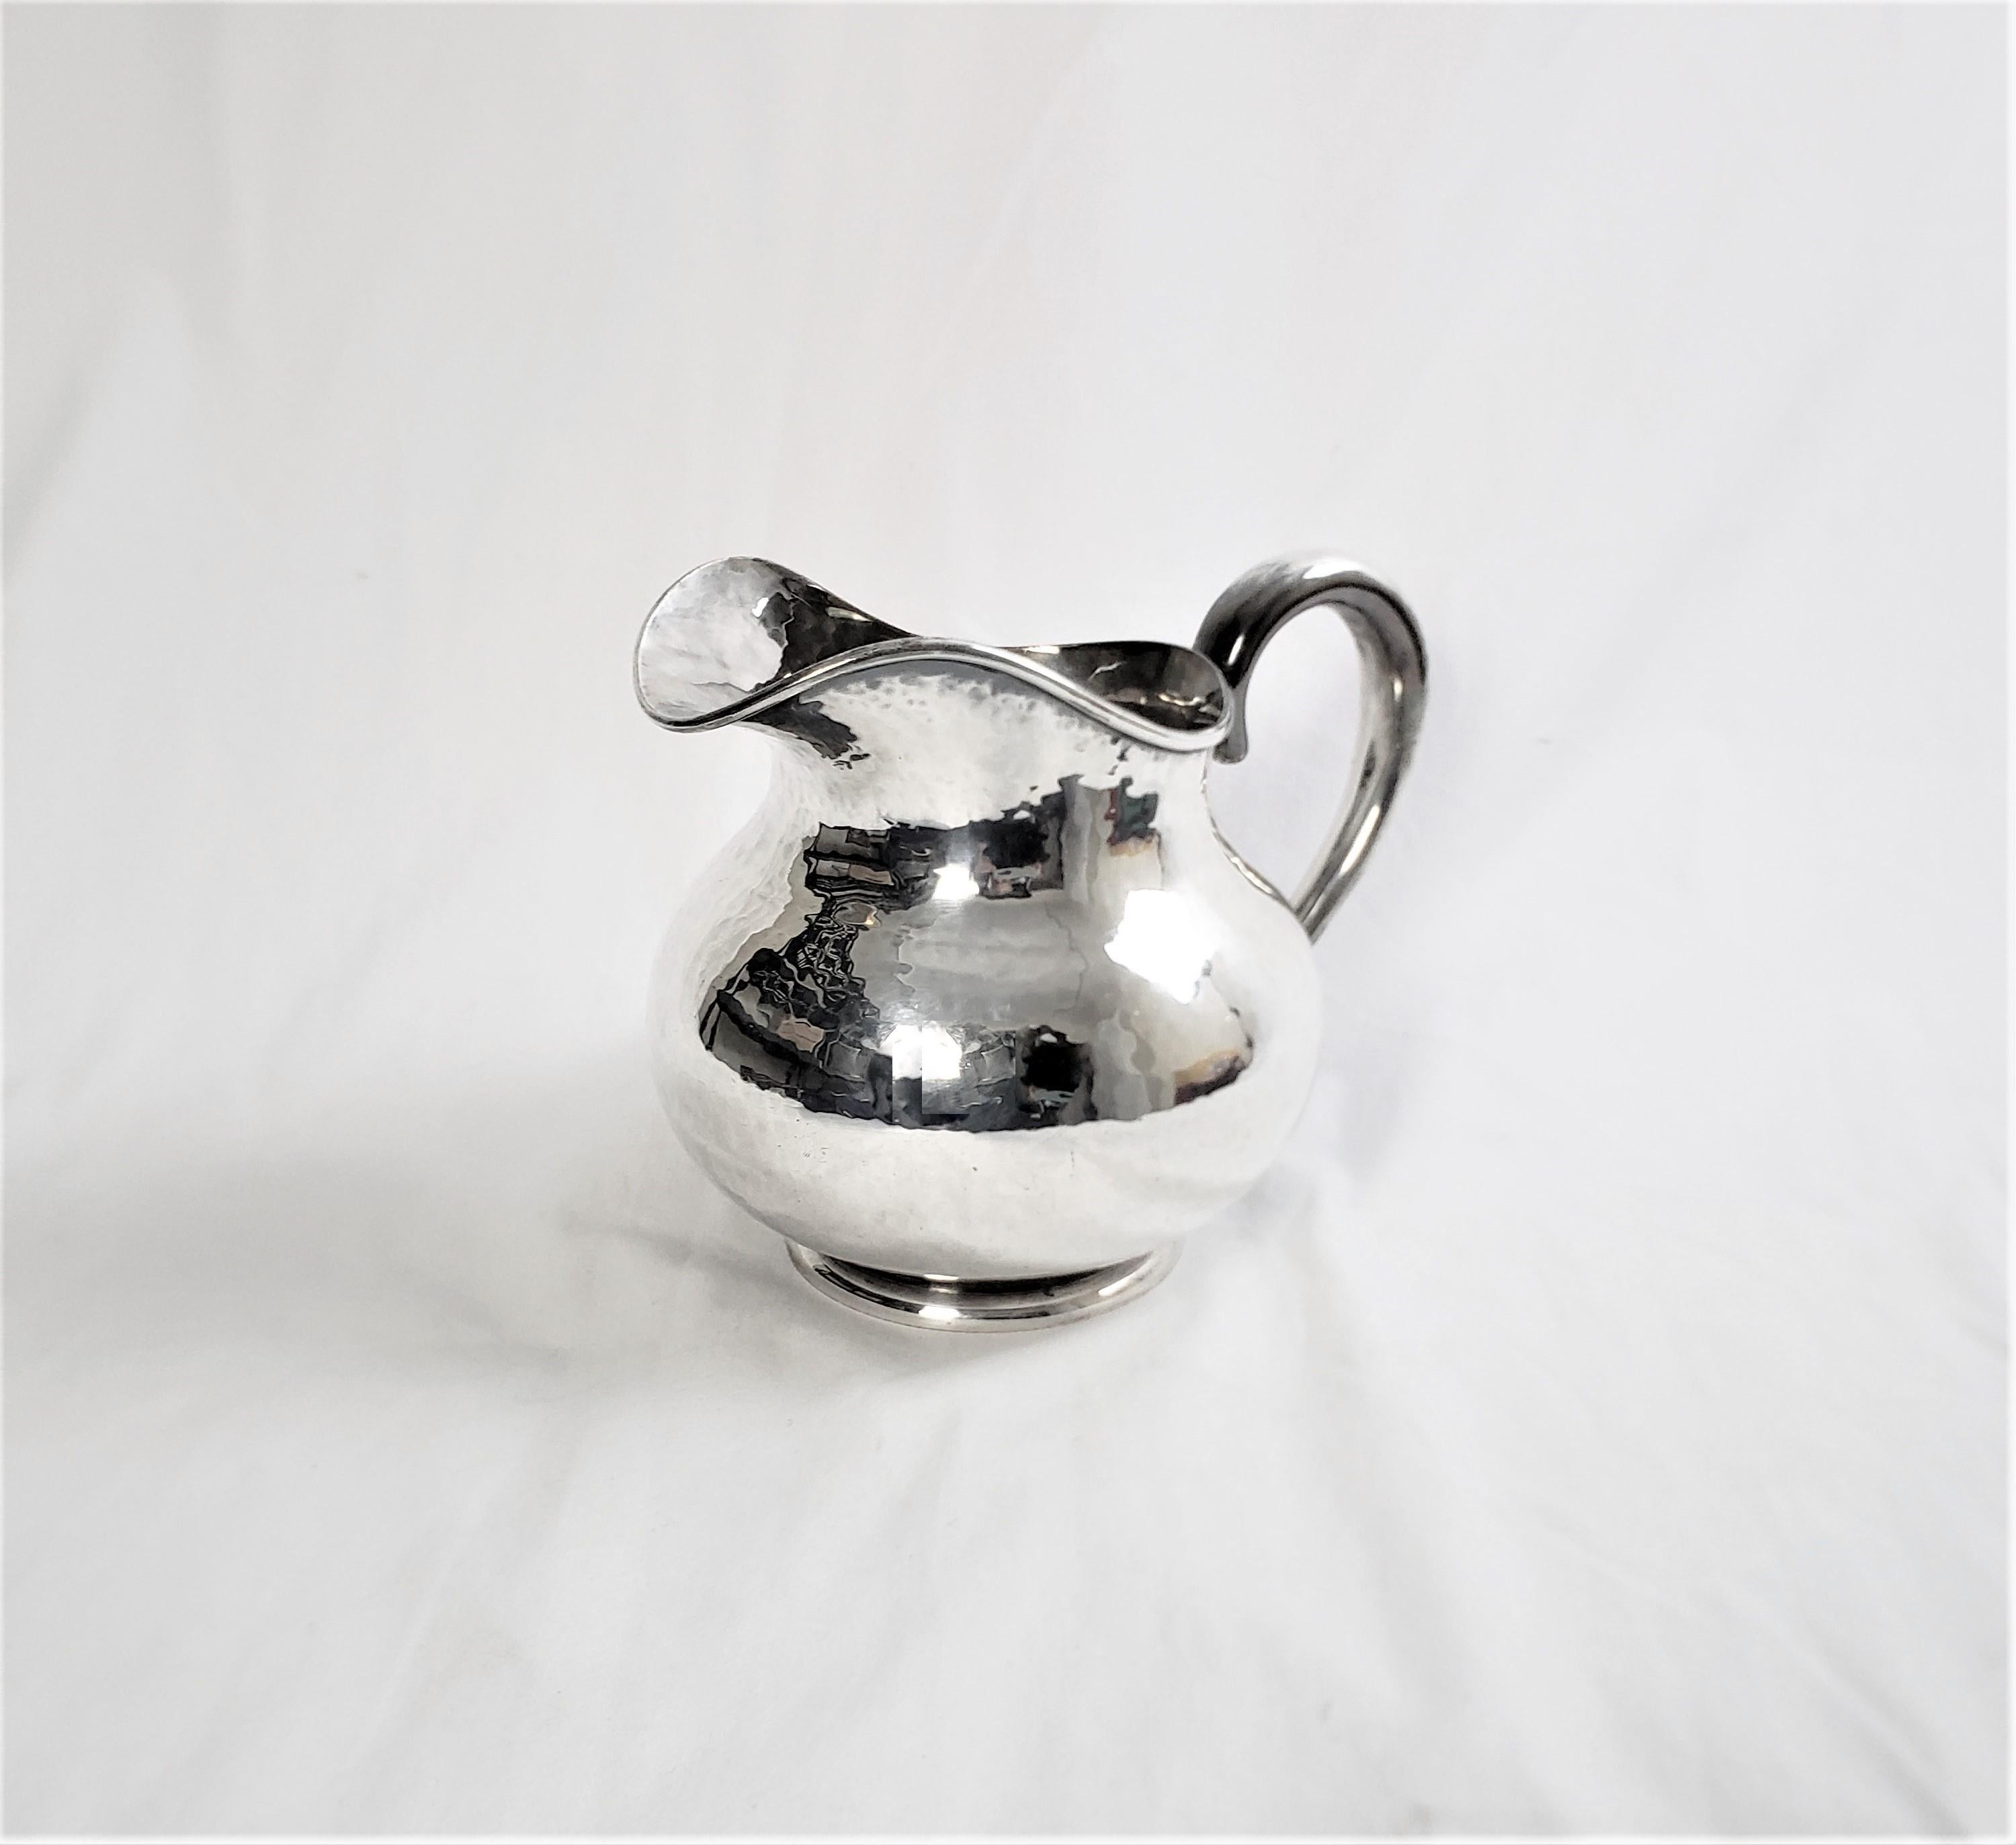 This small pitcher has no maker's marks, but presumed to have originated from the United States and date to approximately 1920 and done in the period Art Deco style. The pitcher is composed of hand hammered copper with a silver plated finish. The